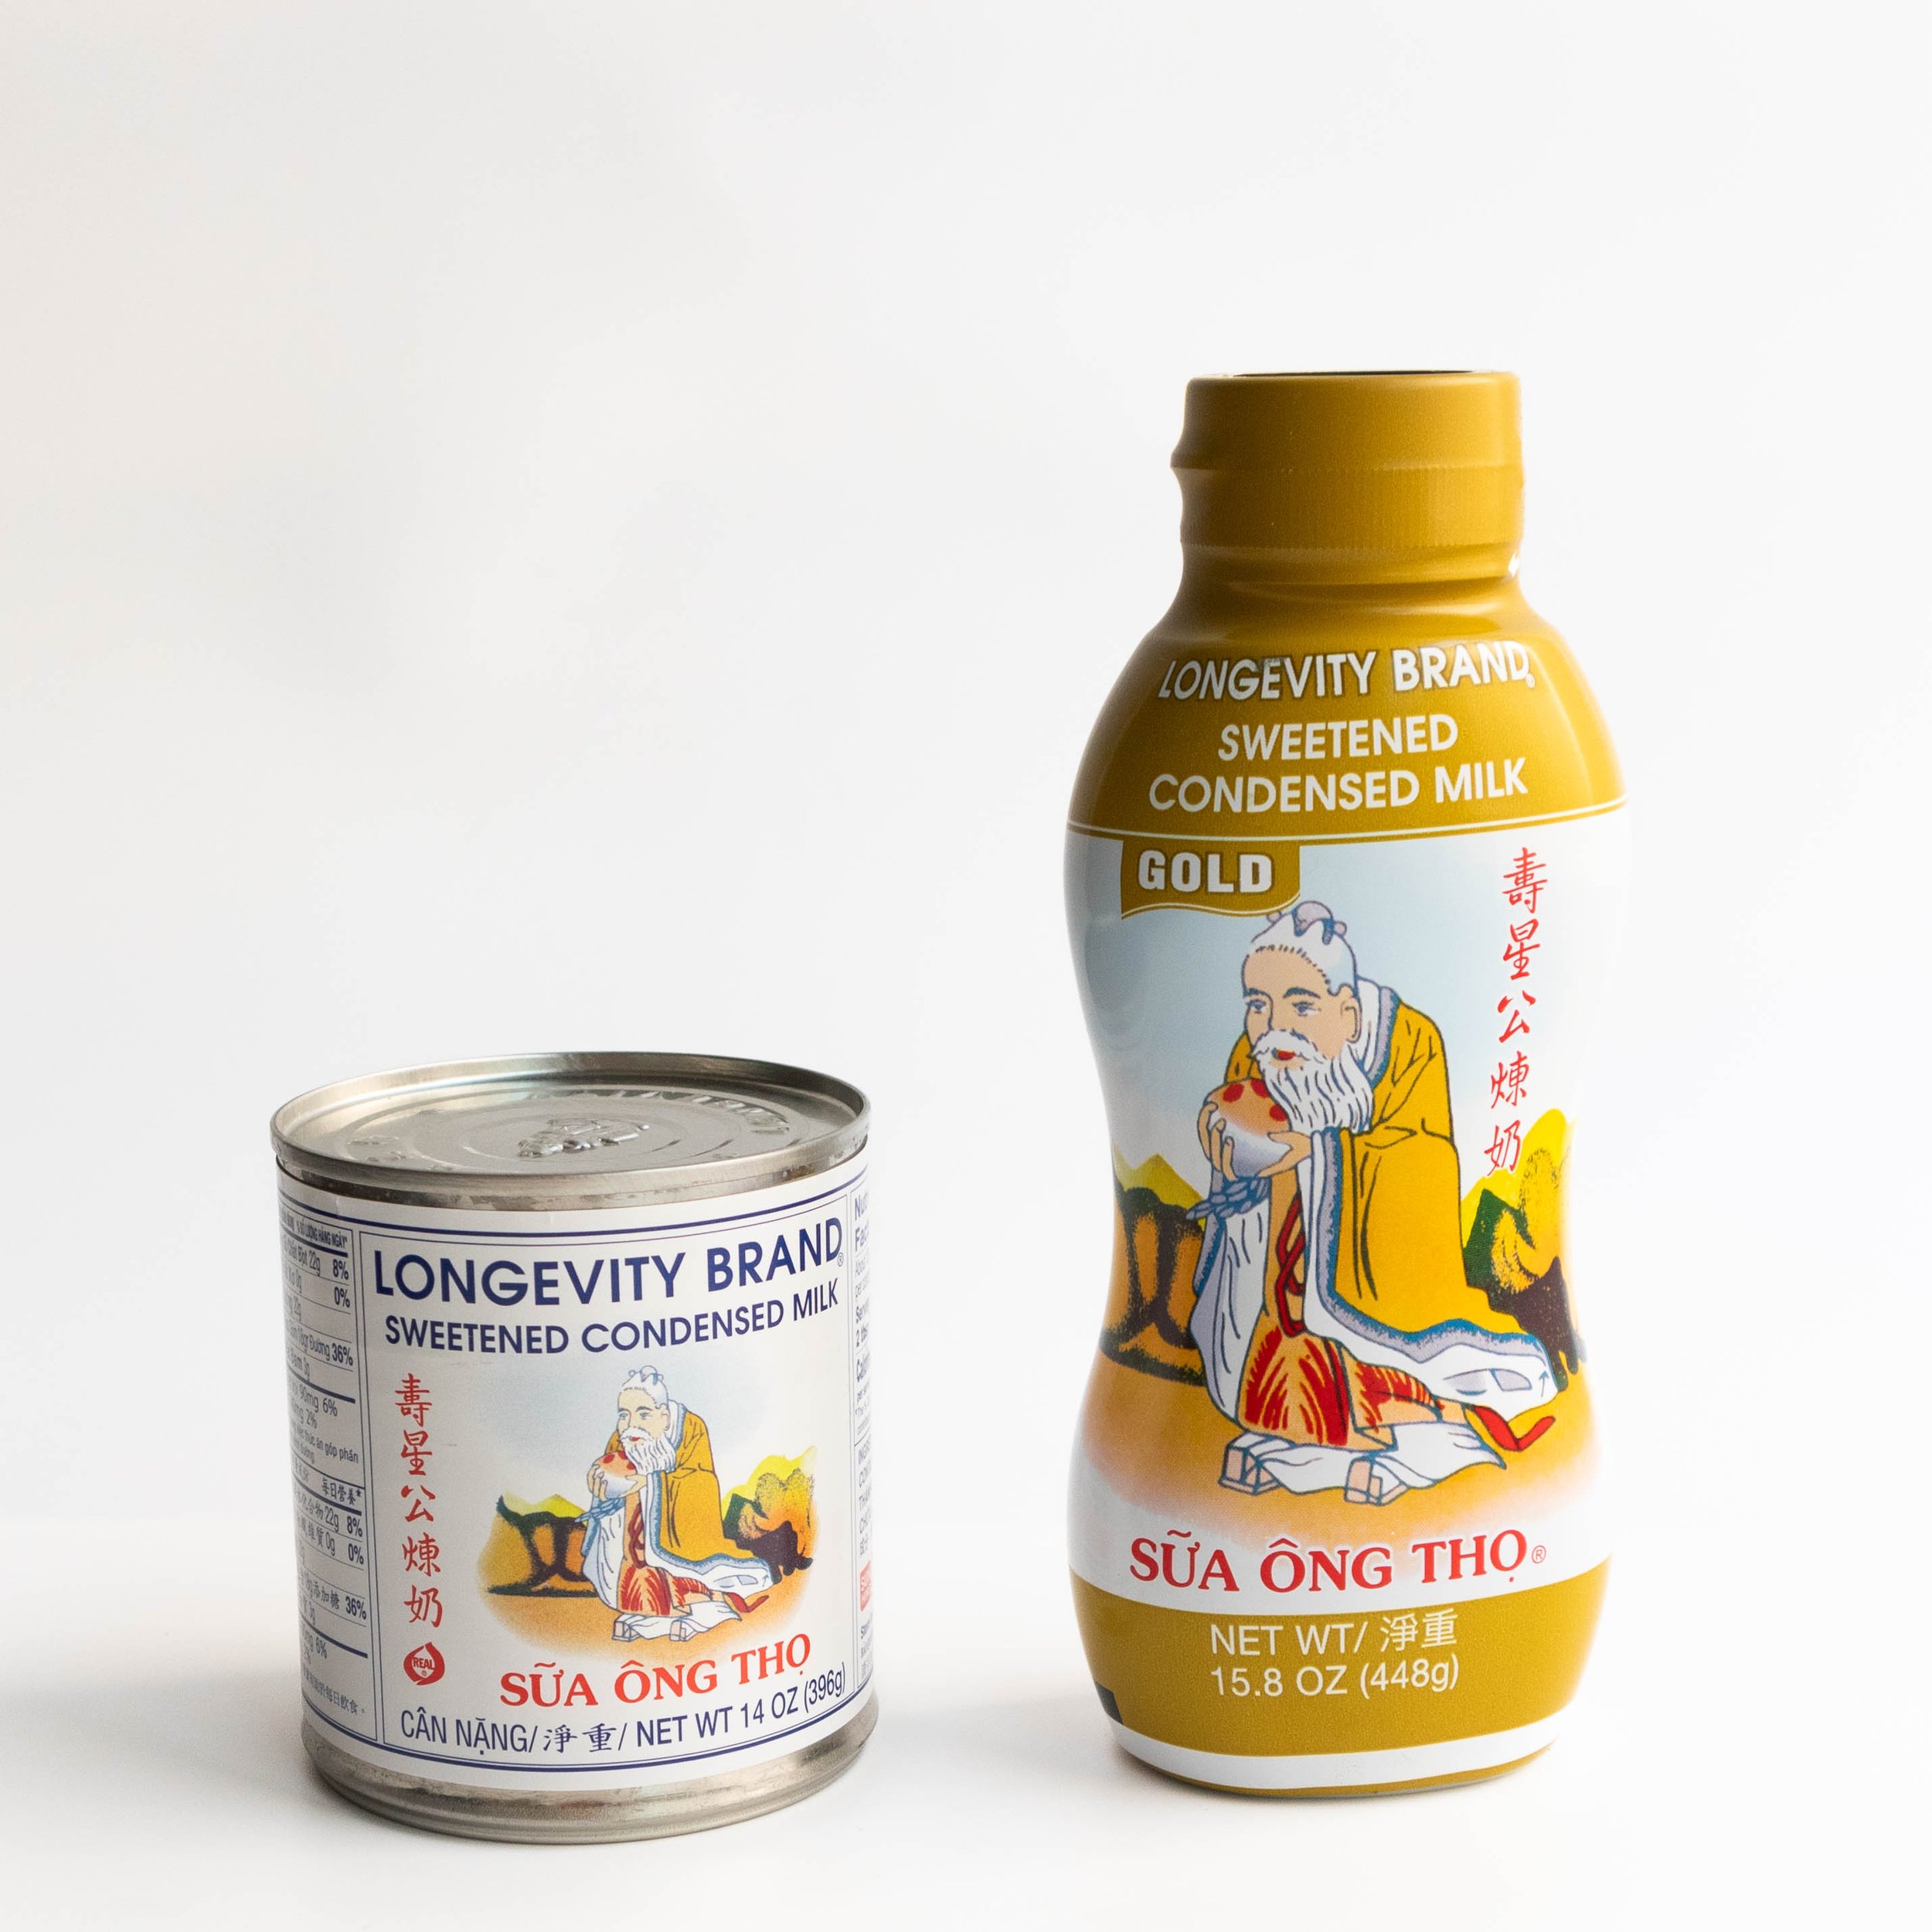 My favorite brand of sweetened condensed milk (Sữa Ông Thọ)